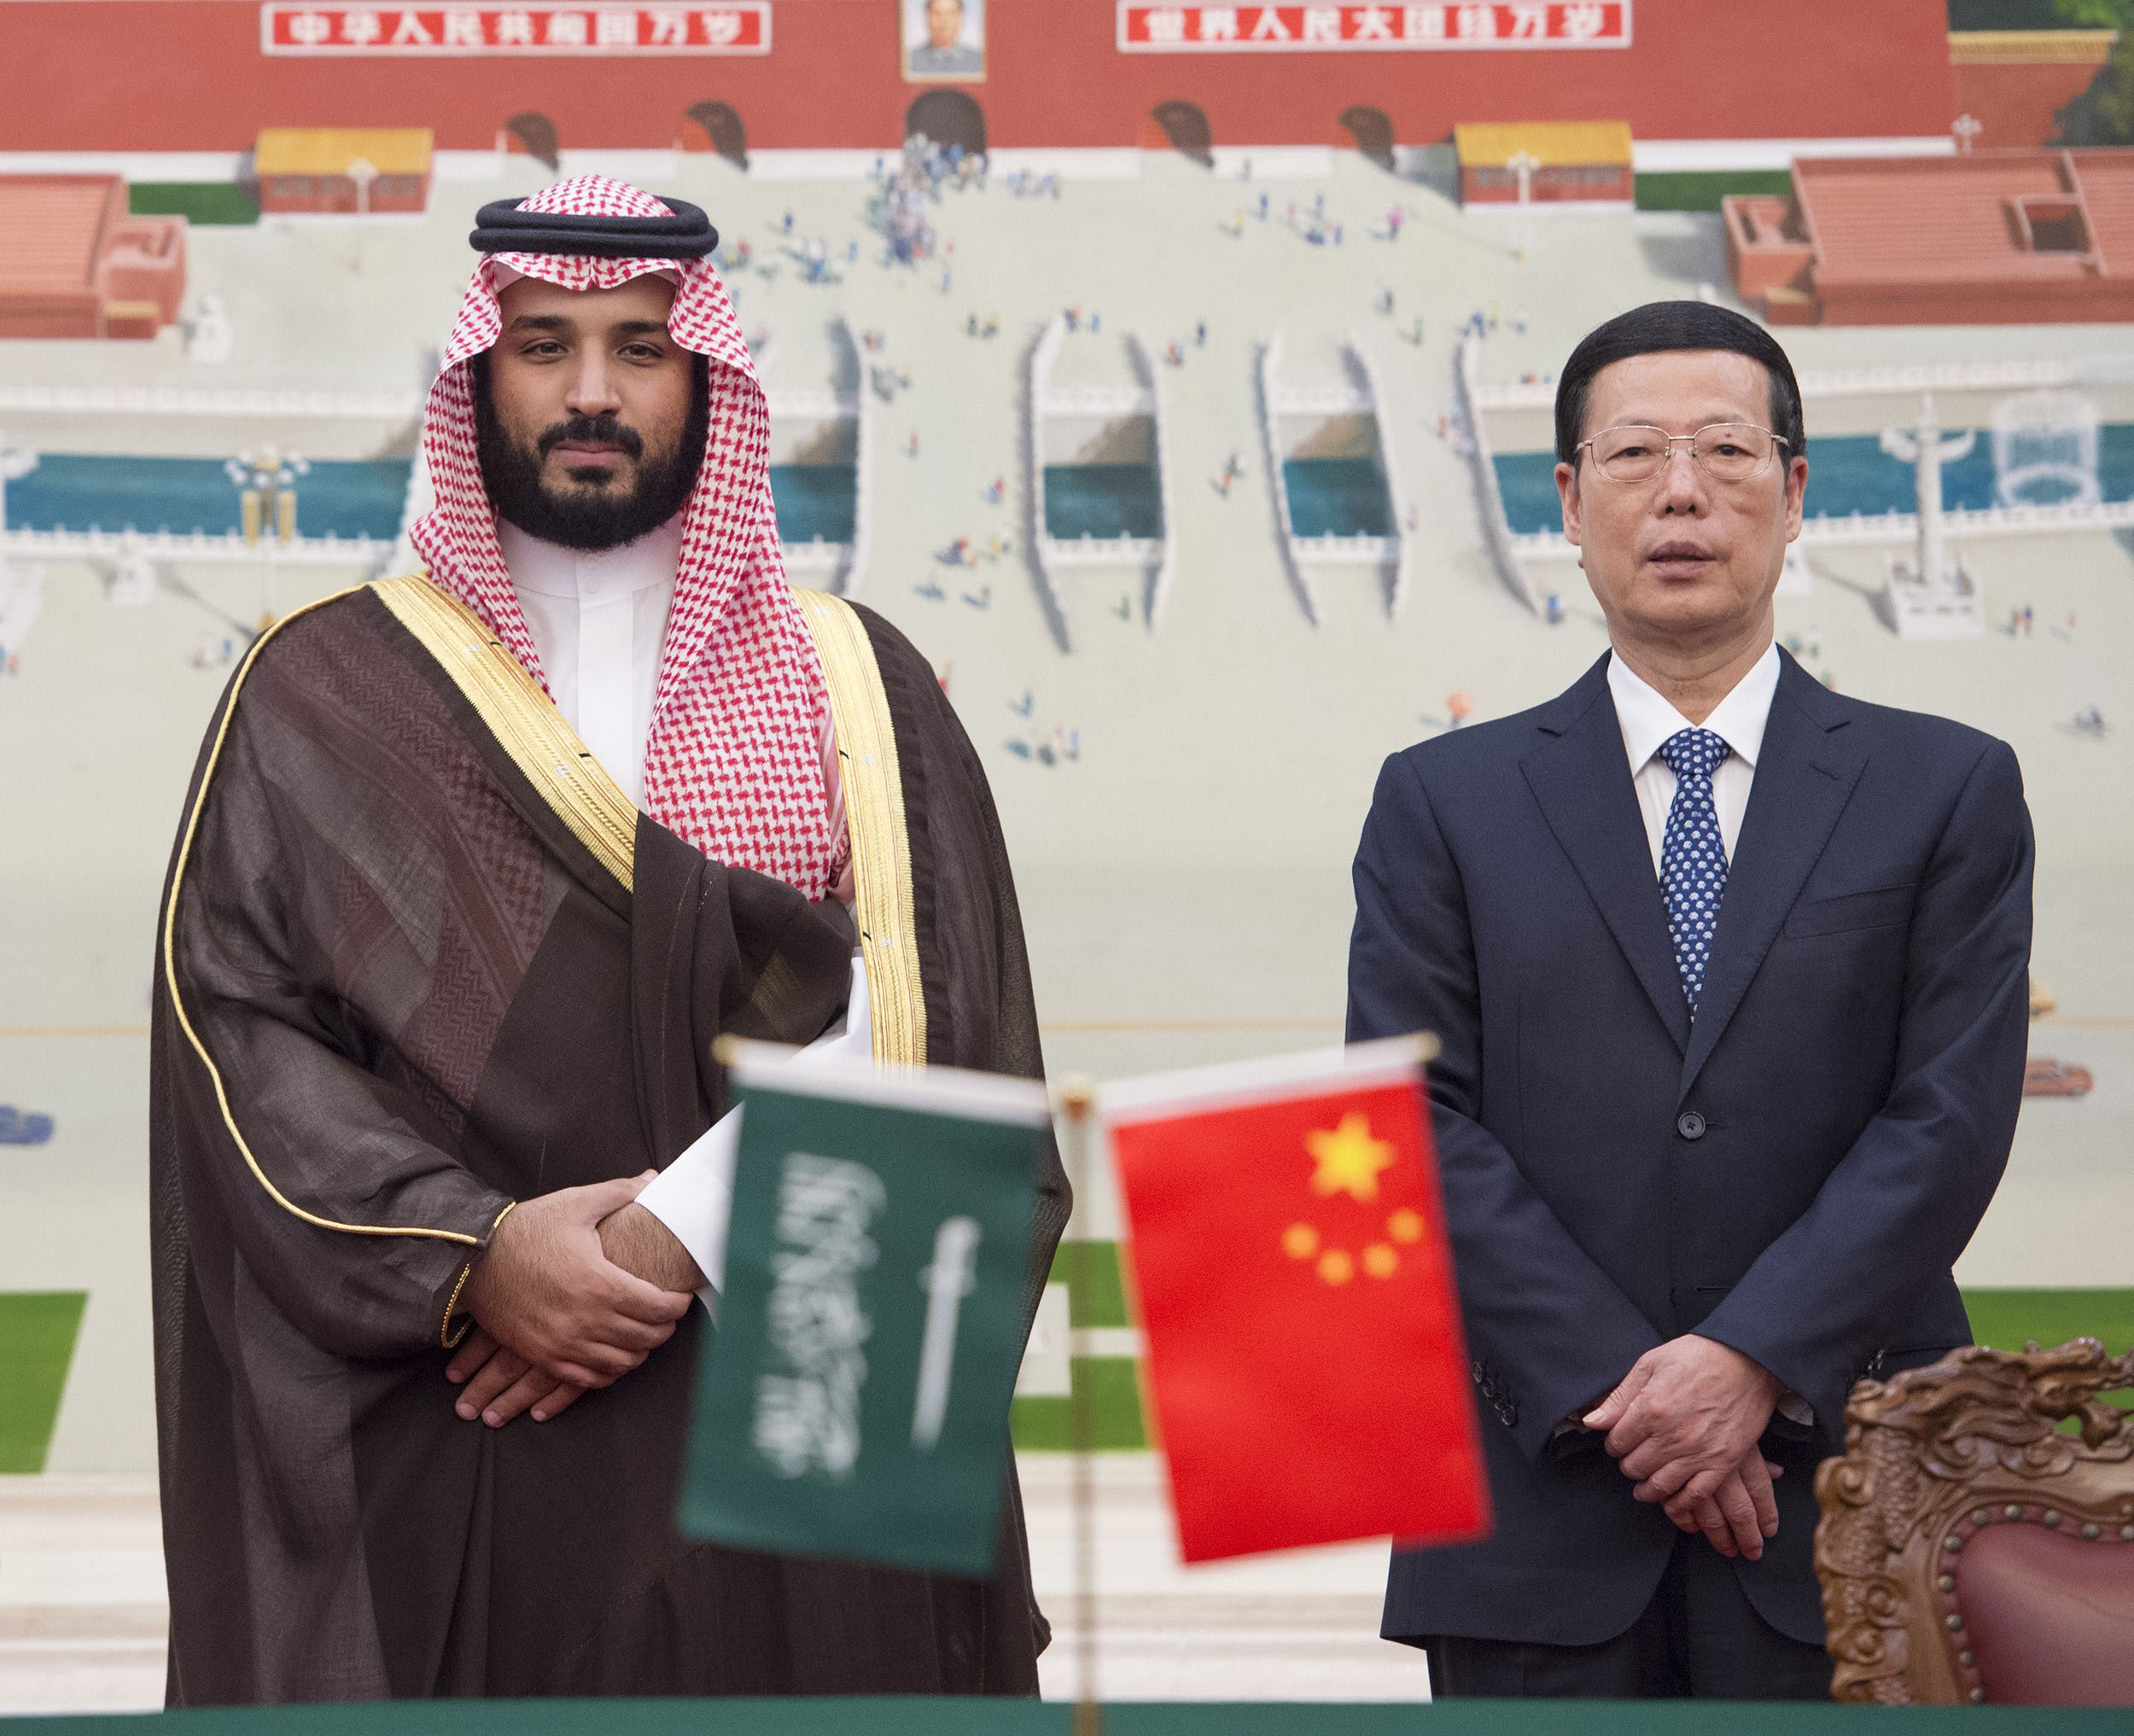 PHOTO: Saudi Defense Minister and Deputy Crown Prince Mohammed bin Salman and Vice Premier of China Zhang Gaoli pose for a photo after a China-Saudi Arabia High-Level Cooperation Council meeting in Beijing, China on Aug. 29, 2016.